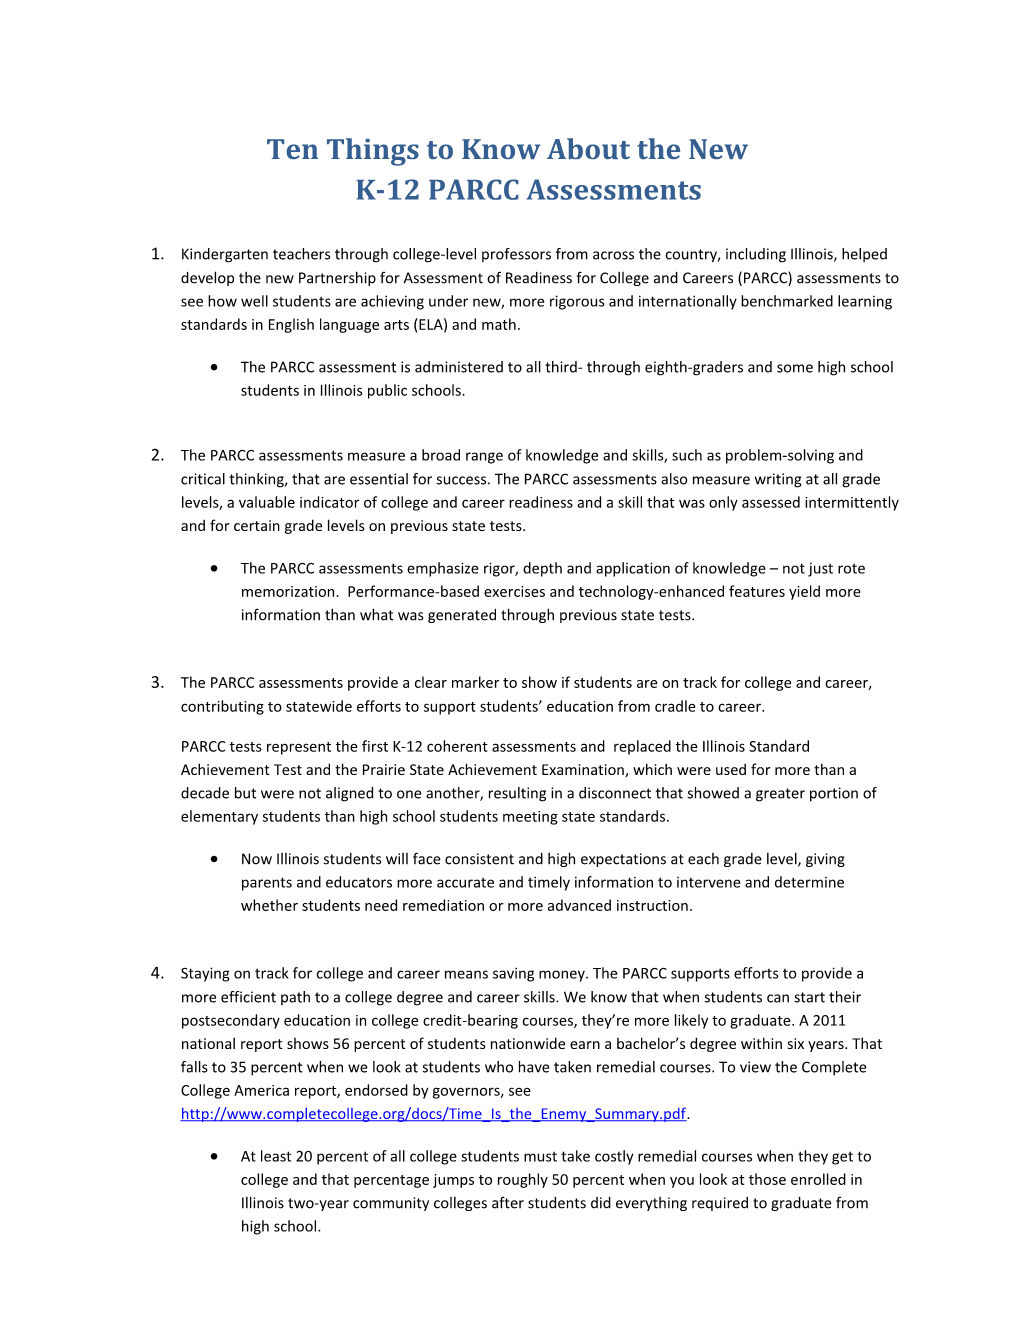 Ten Things to Know About the New K-12 PARCC Assessments